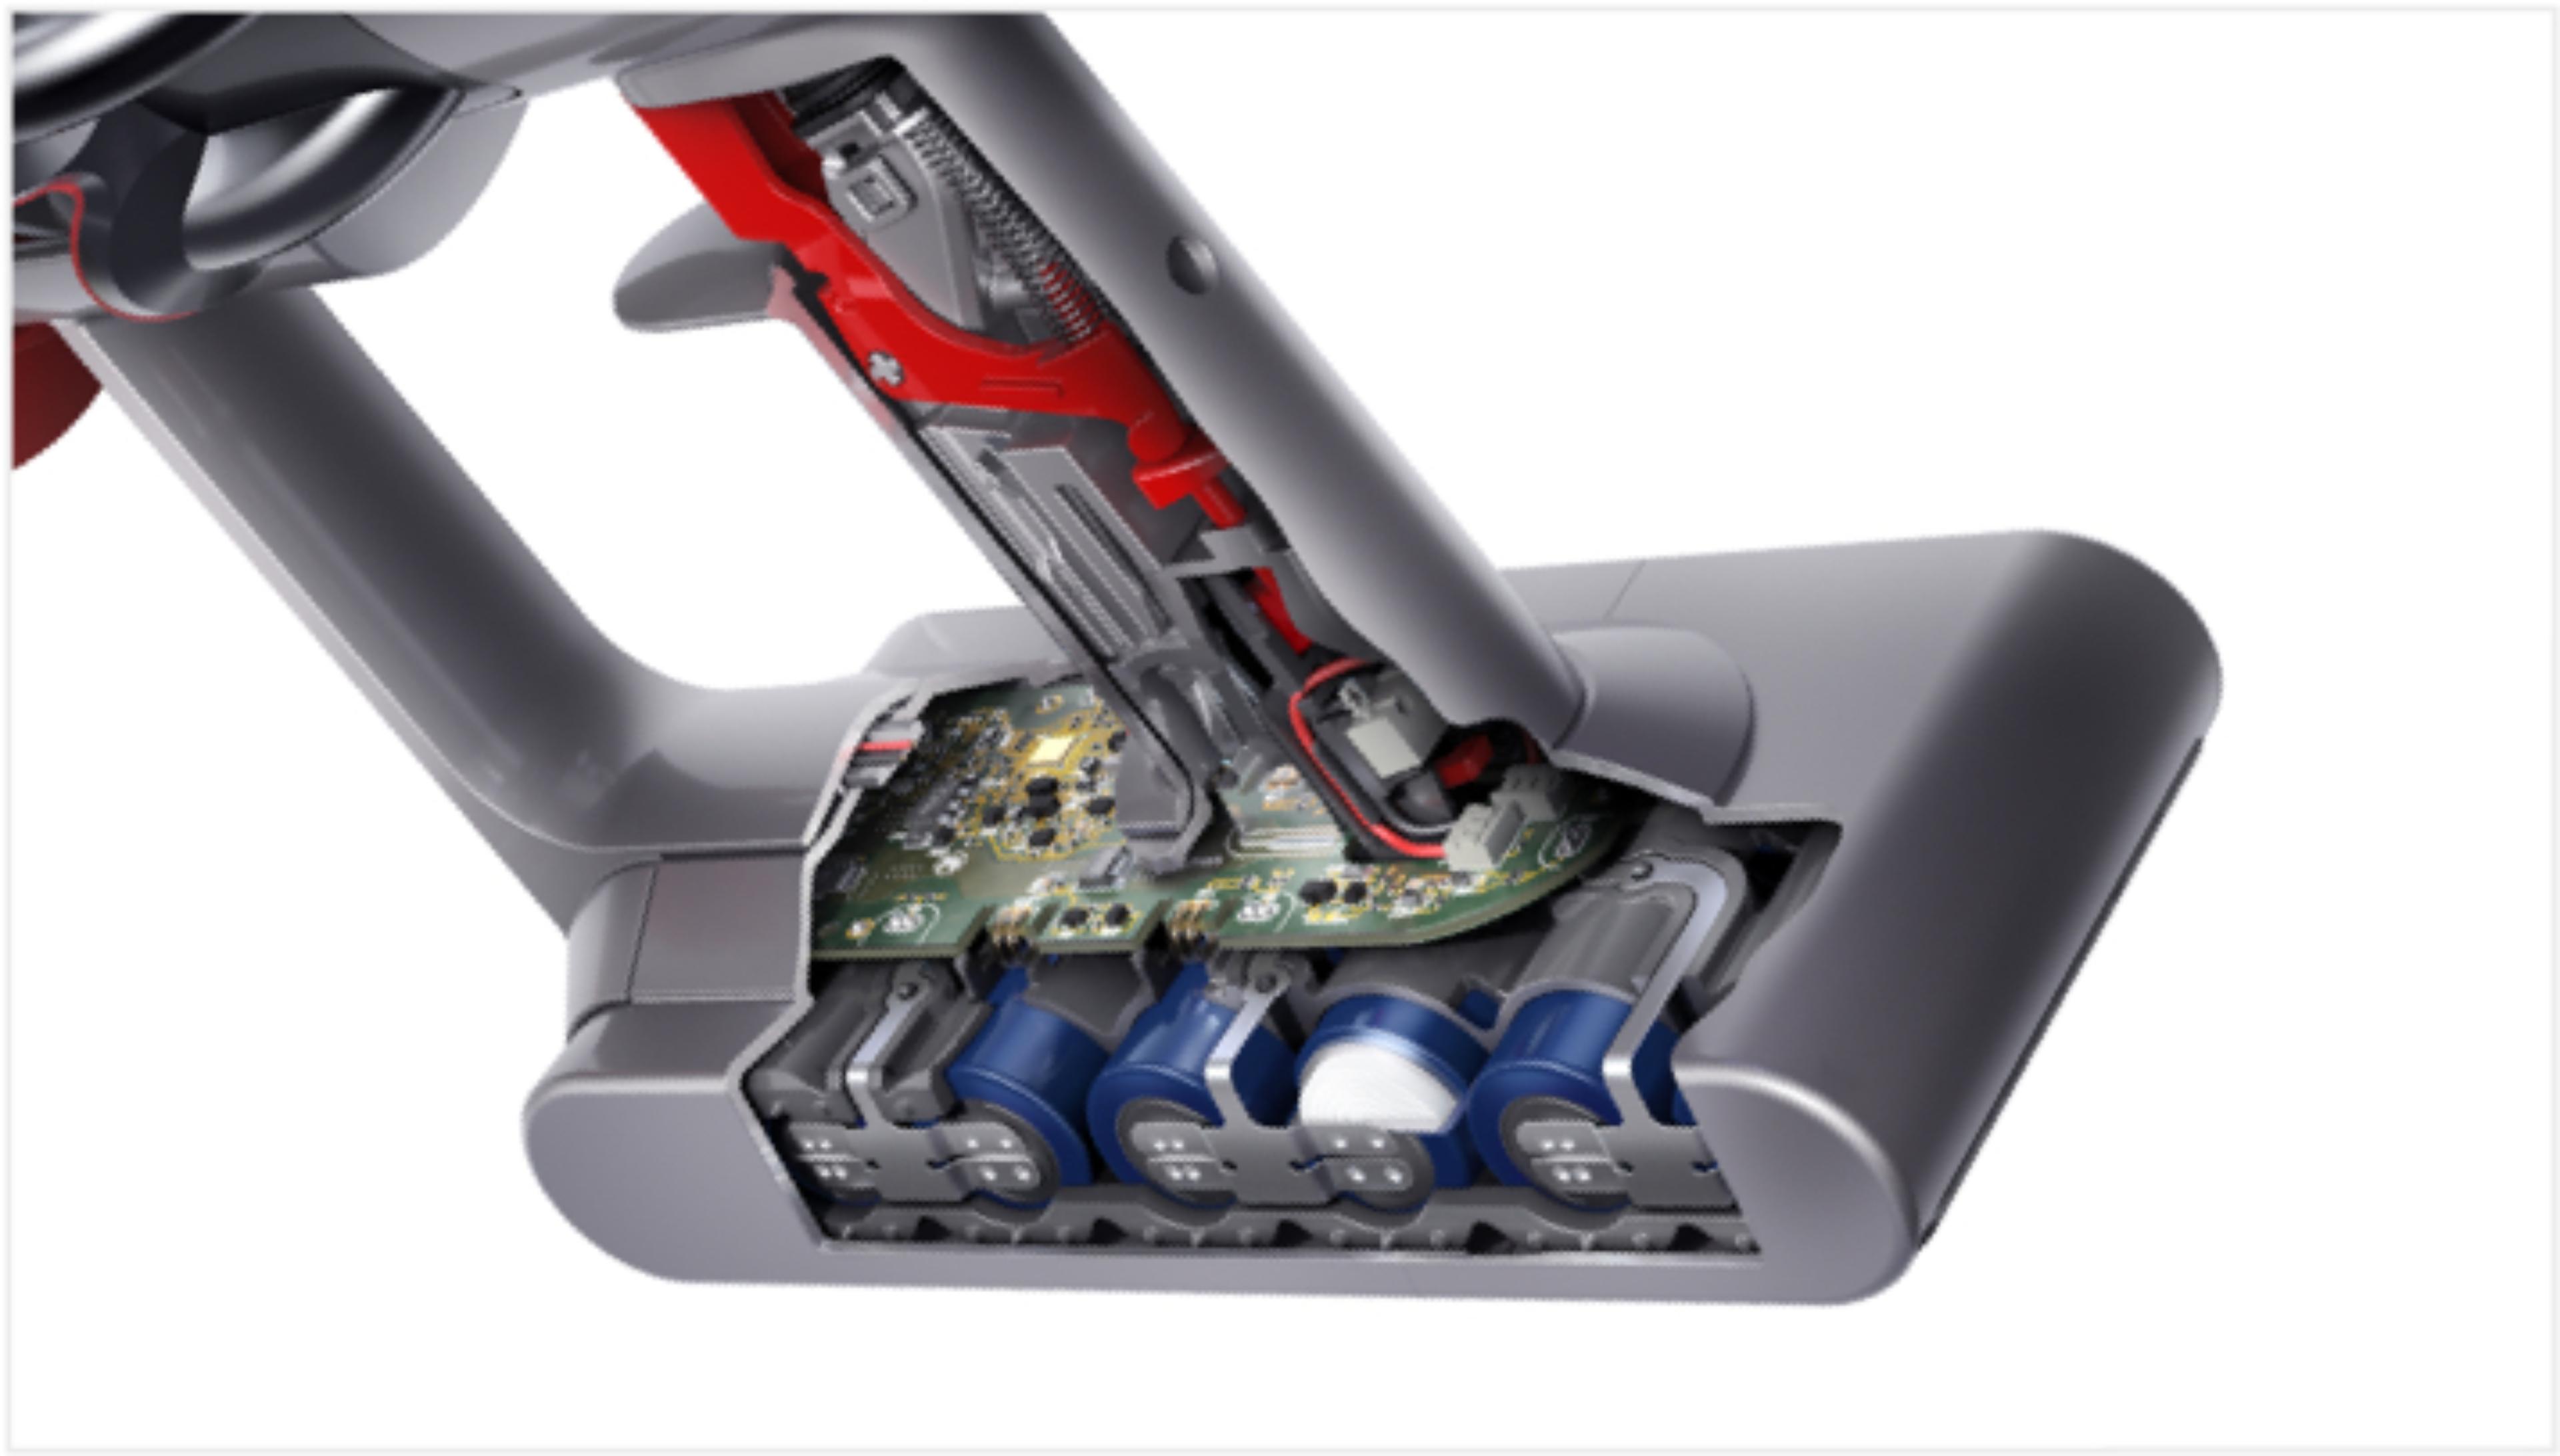 Cutaway of Dyson V11™ vacuum battery pack